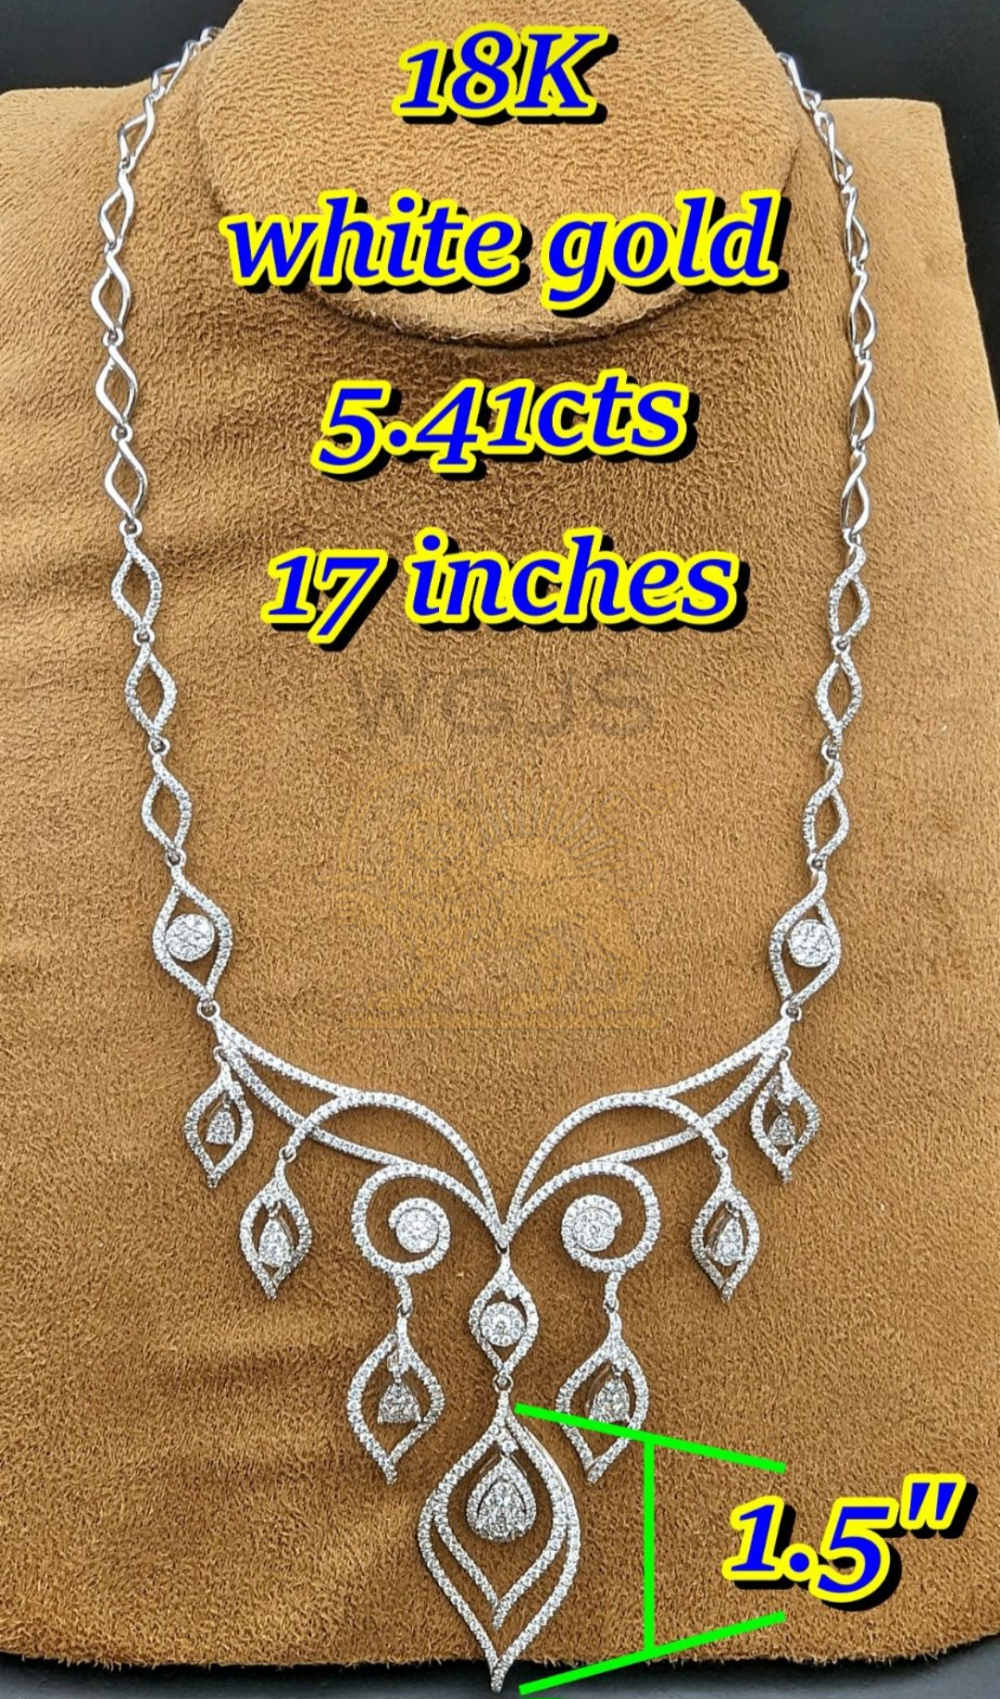 18K WHITE GOLD NECKLACE  5.41CT    17